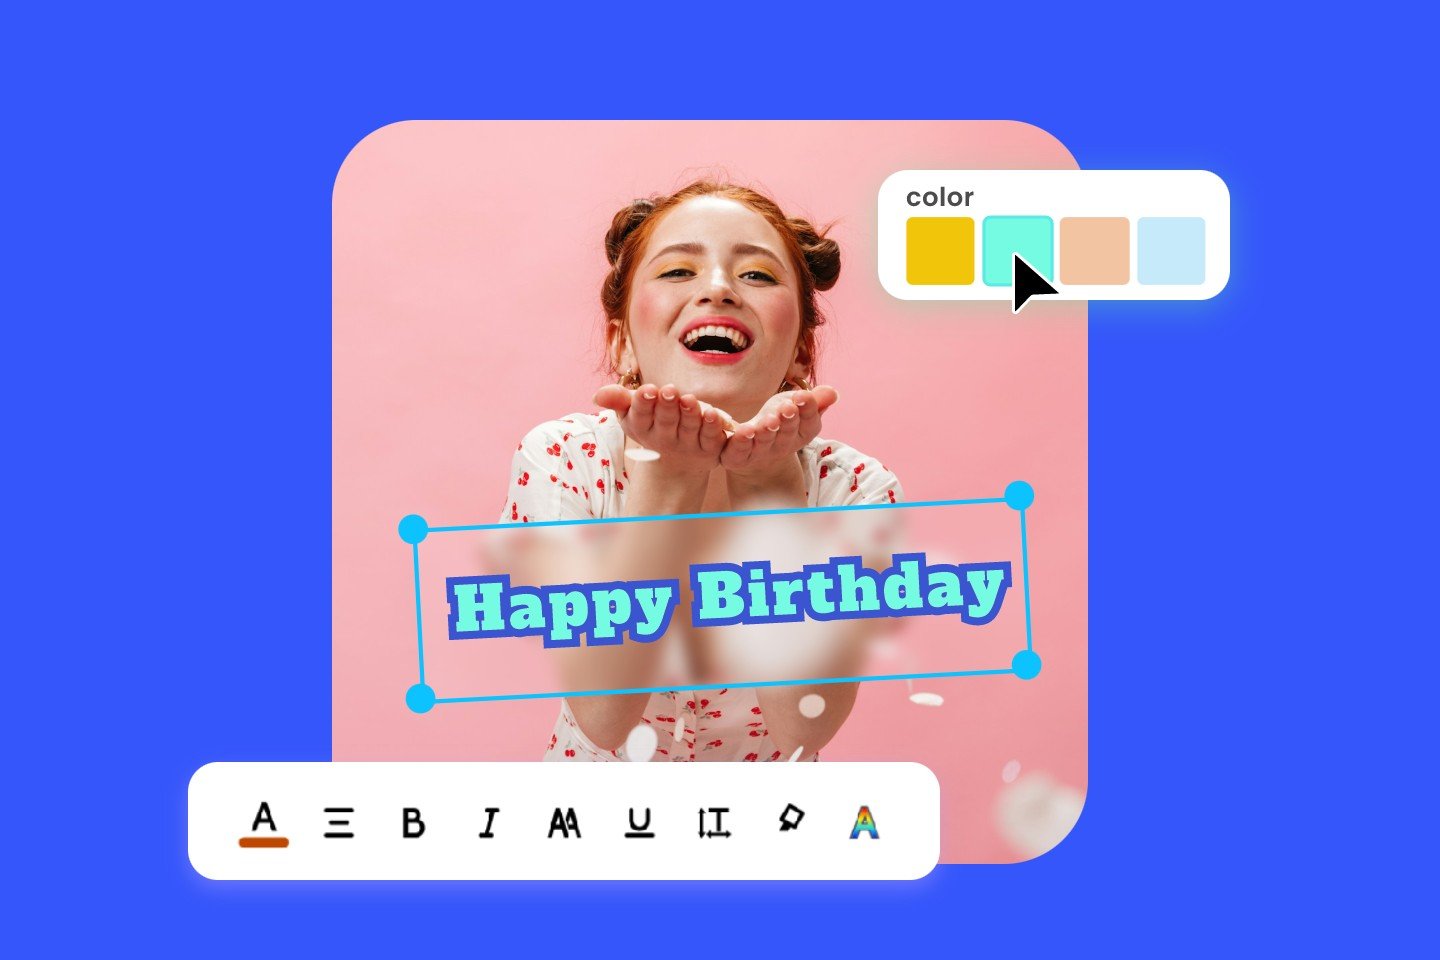 Add happy birthday caption to a girl image with fotor caption adder